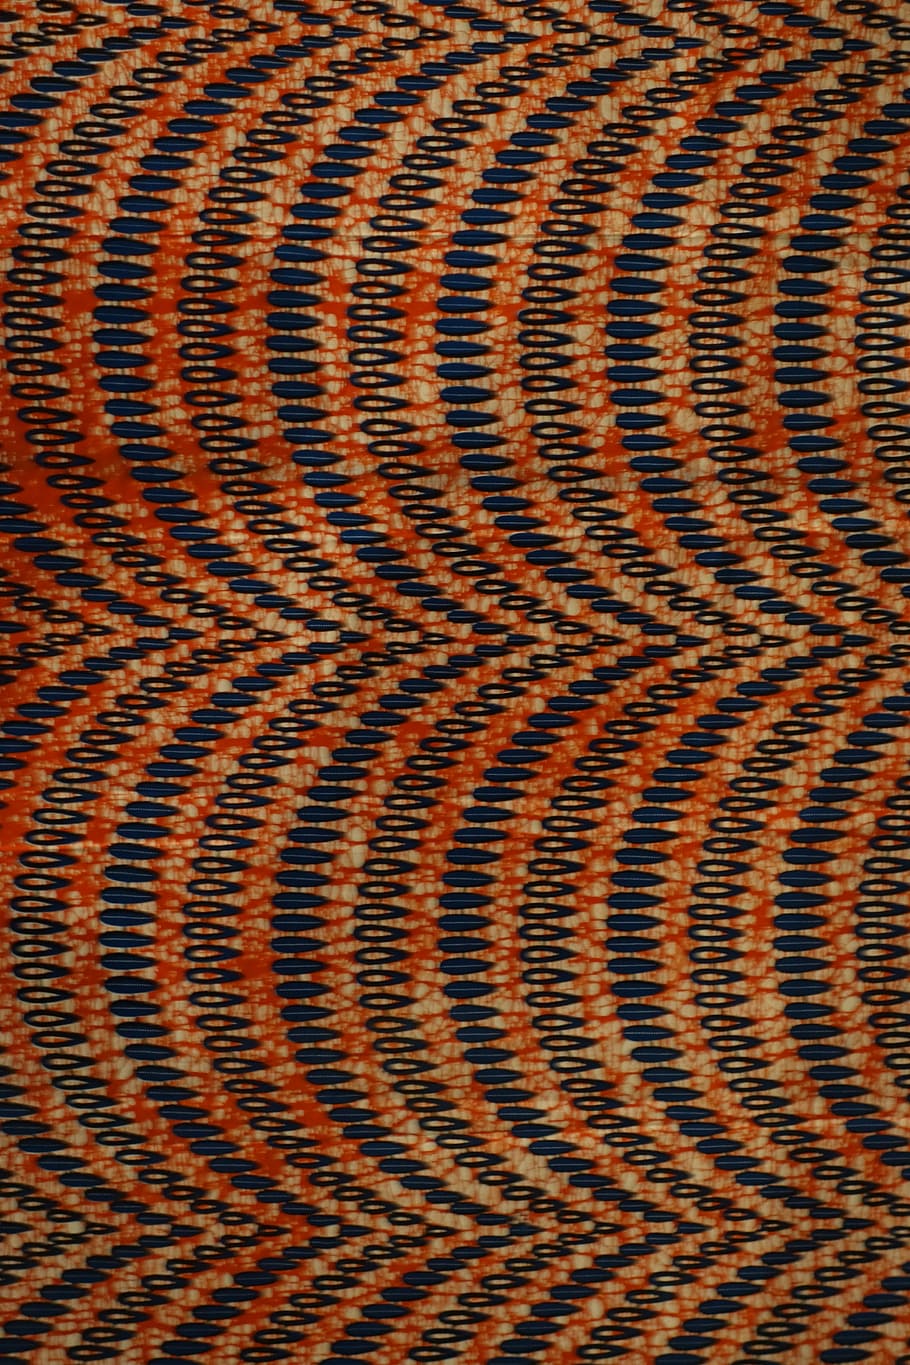 dessin, sixties, africa, pattern, full frame, backgrounds, textured, material, textile, close-up